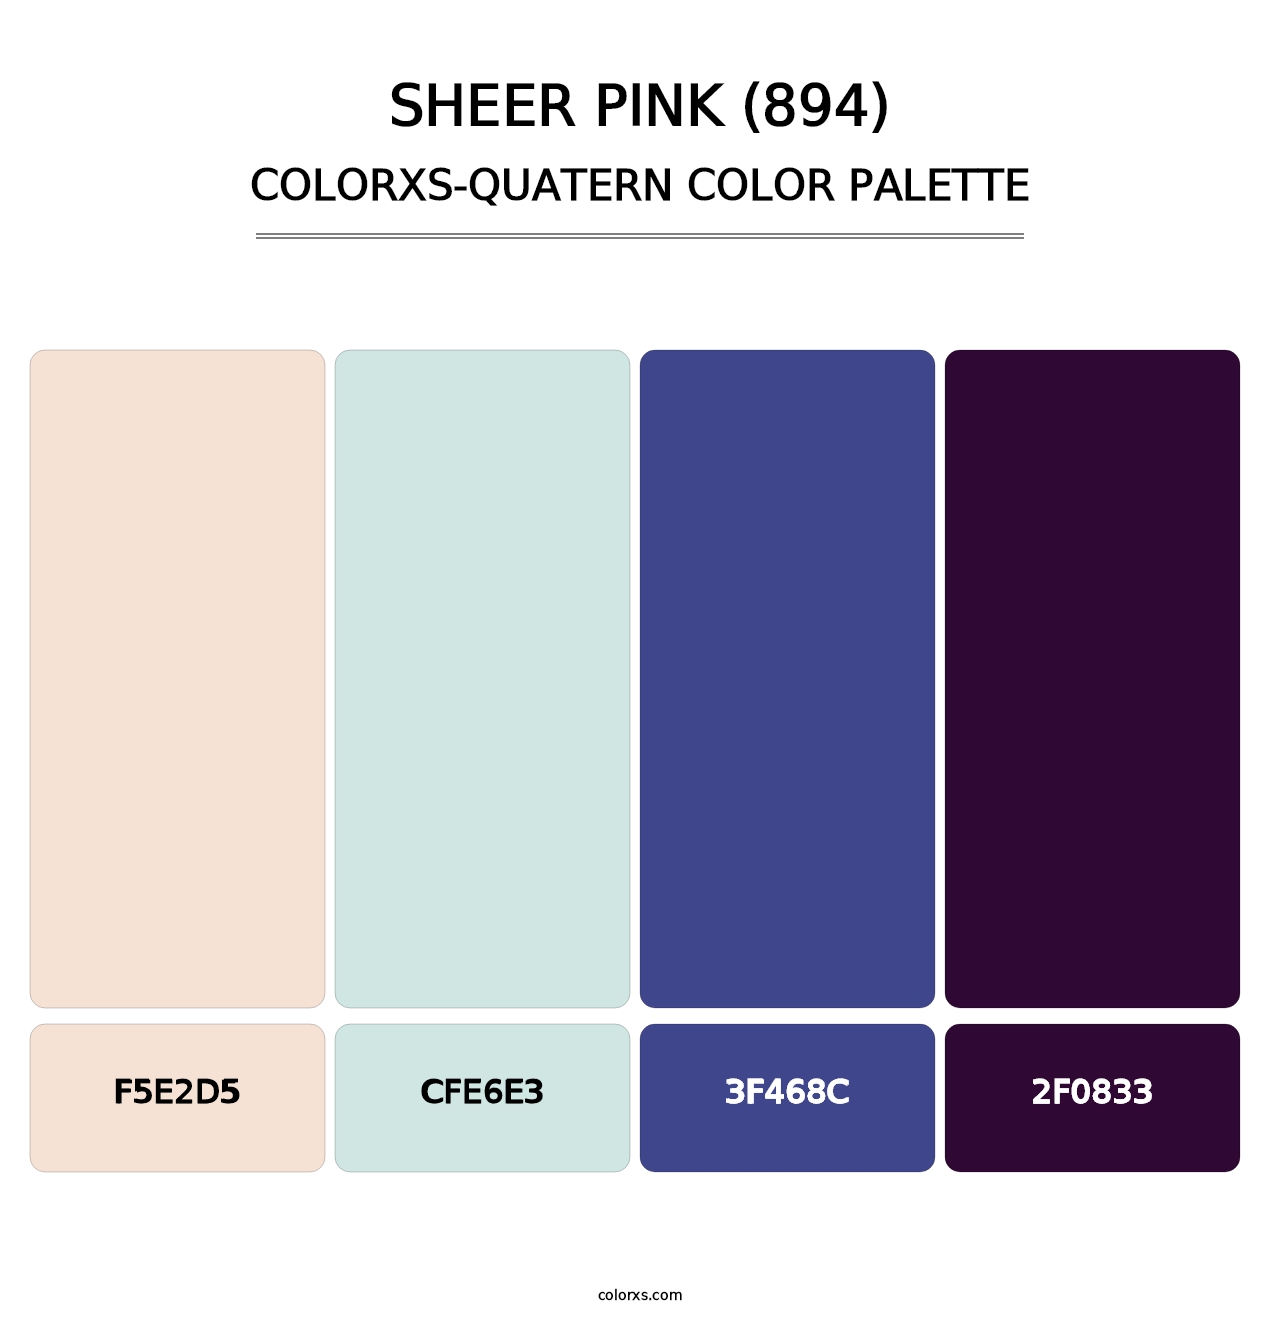 Sheer Pink (894) - Colorxs Quatern Palette